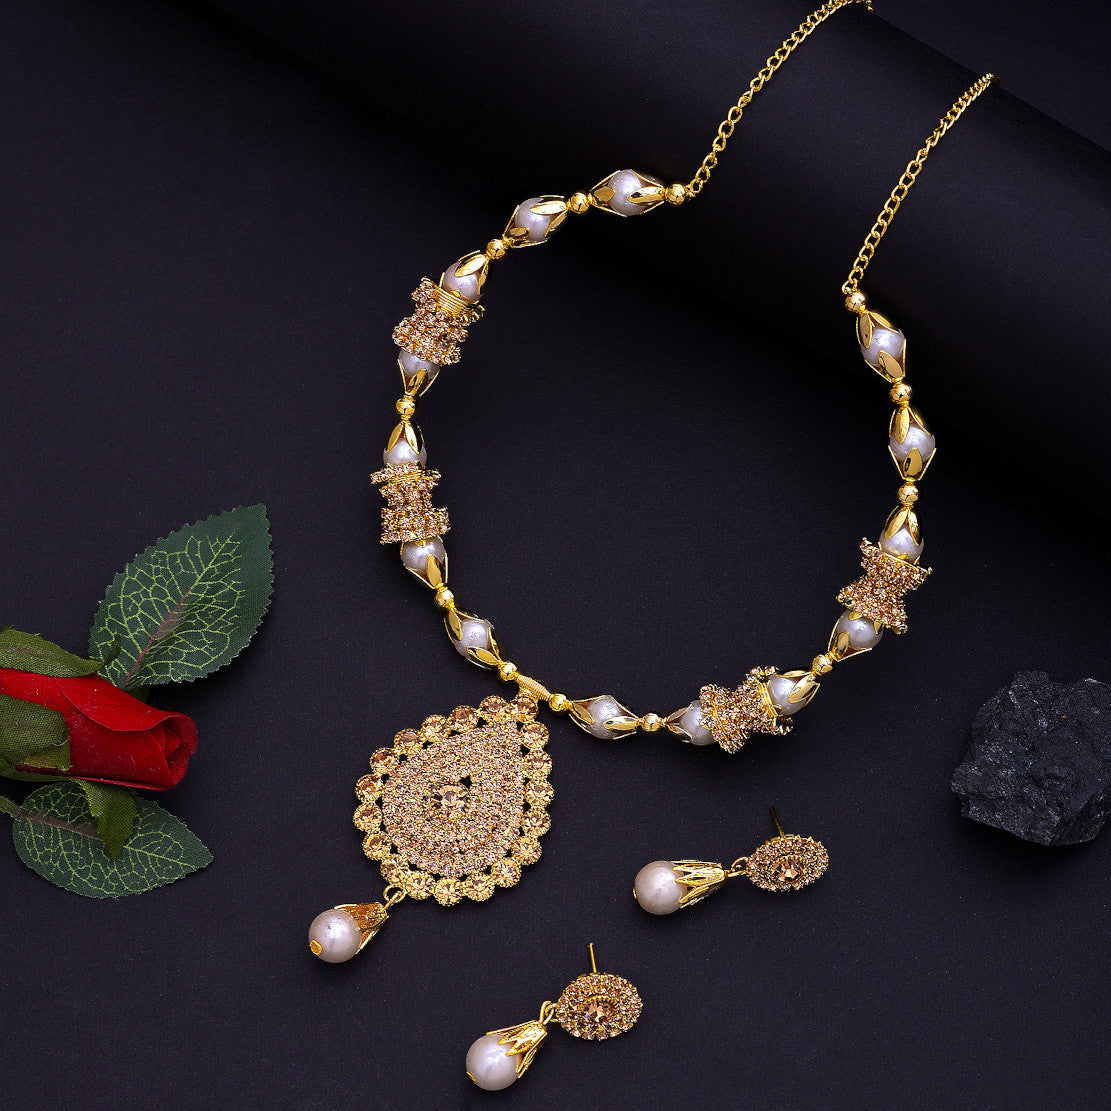 Necklace with Earrings for Women | Buy This Jewellery set Online from Mekkna